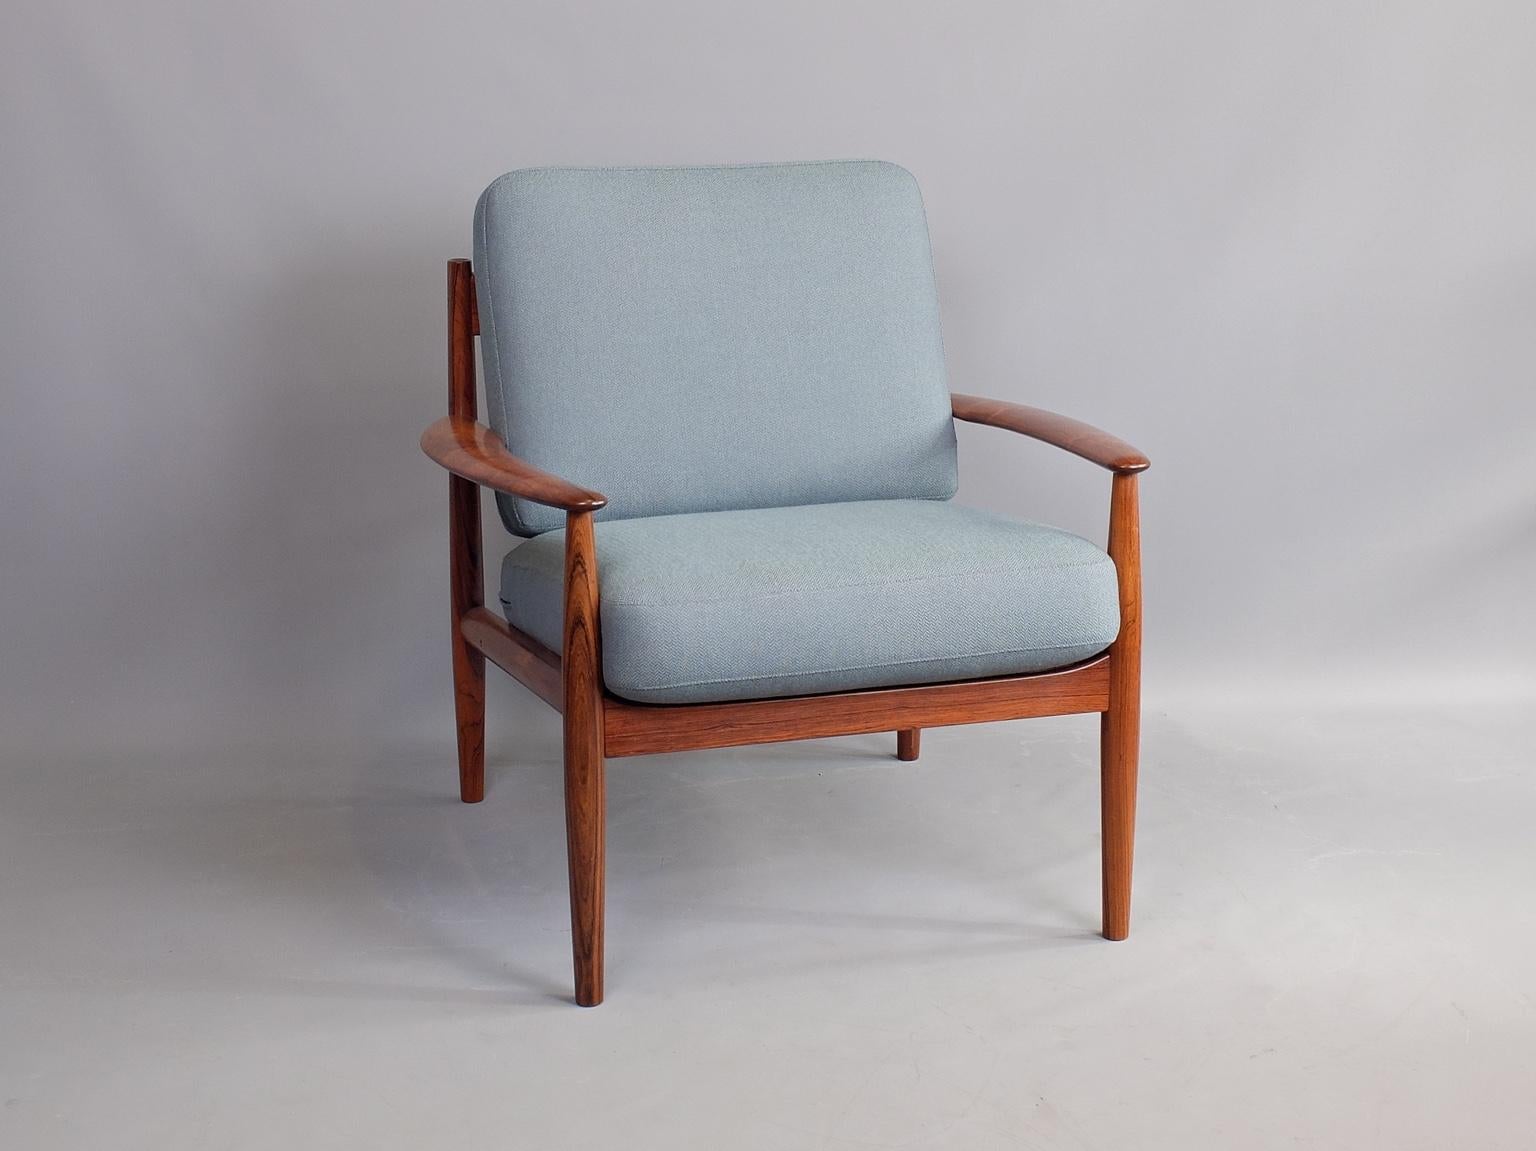 Mid-20th Century Grete Jalk Model 118 Rosewood Lounge Chair Danish 1960s For Sale